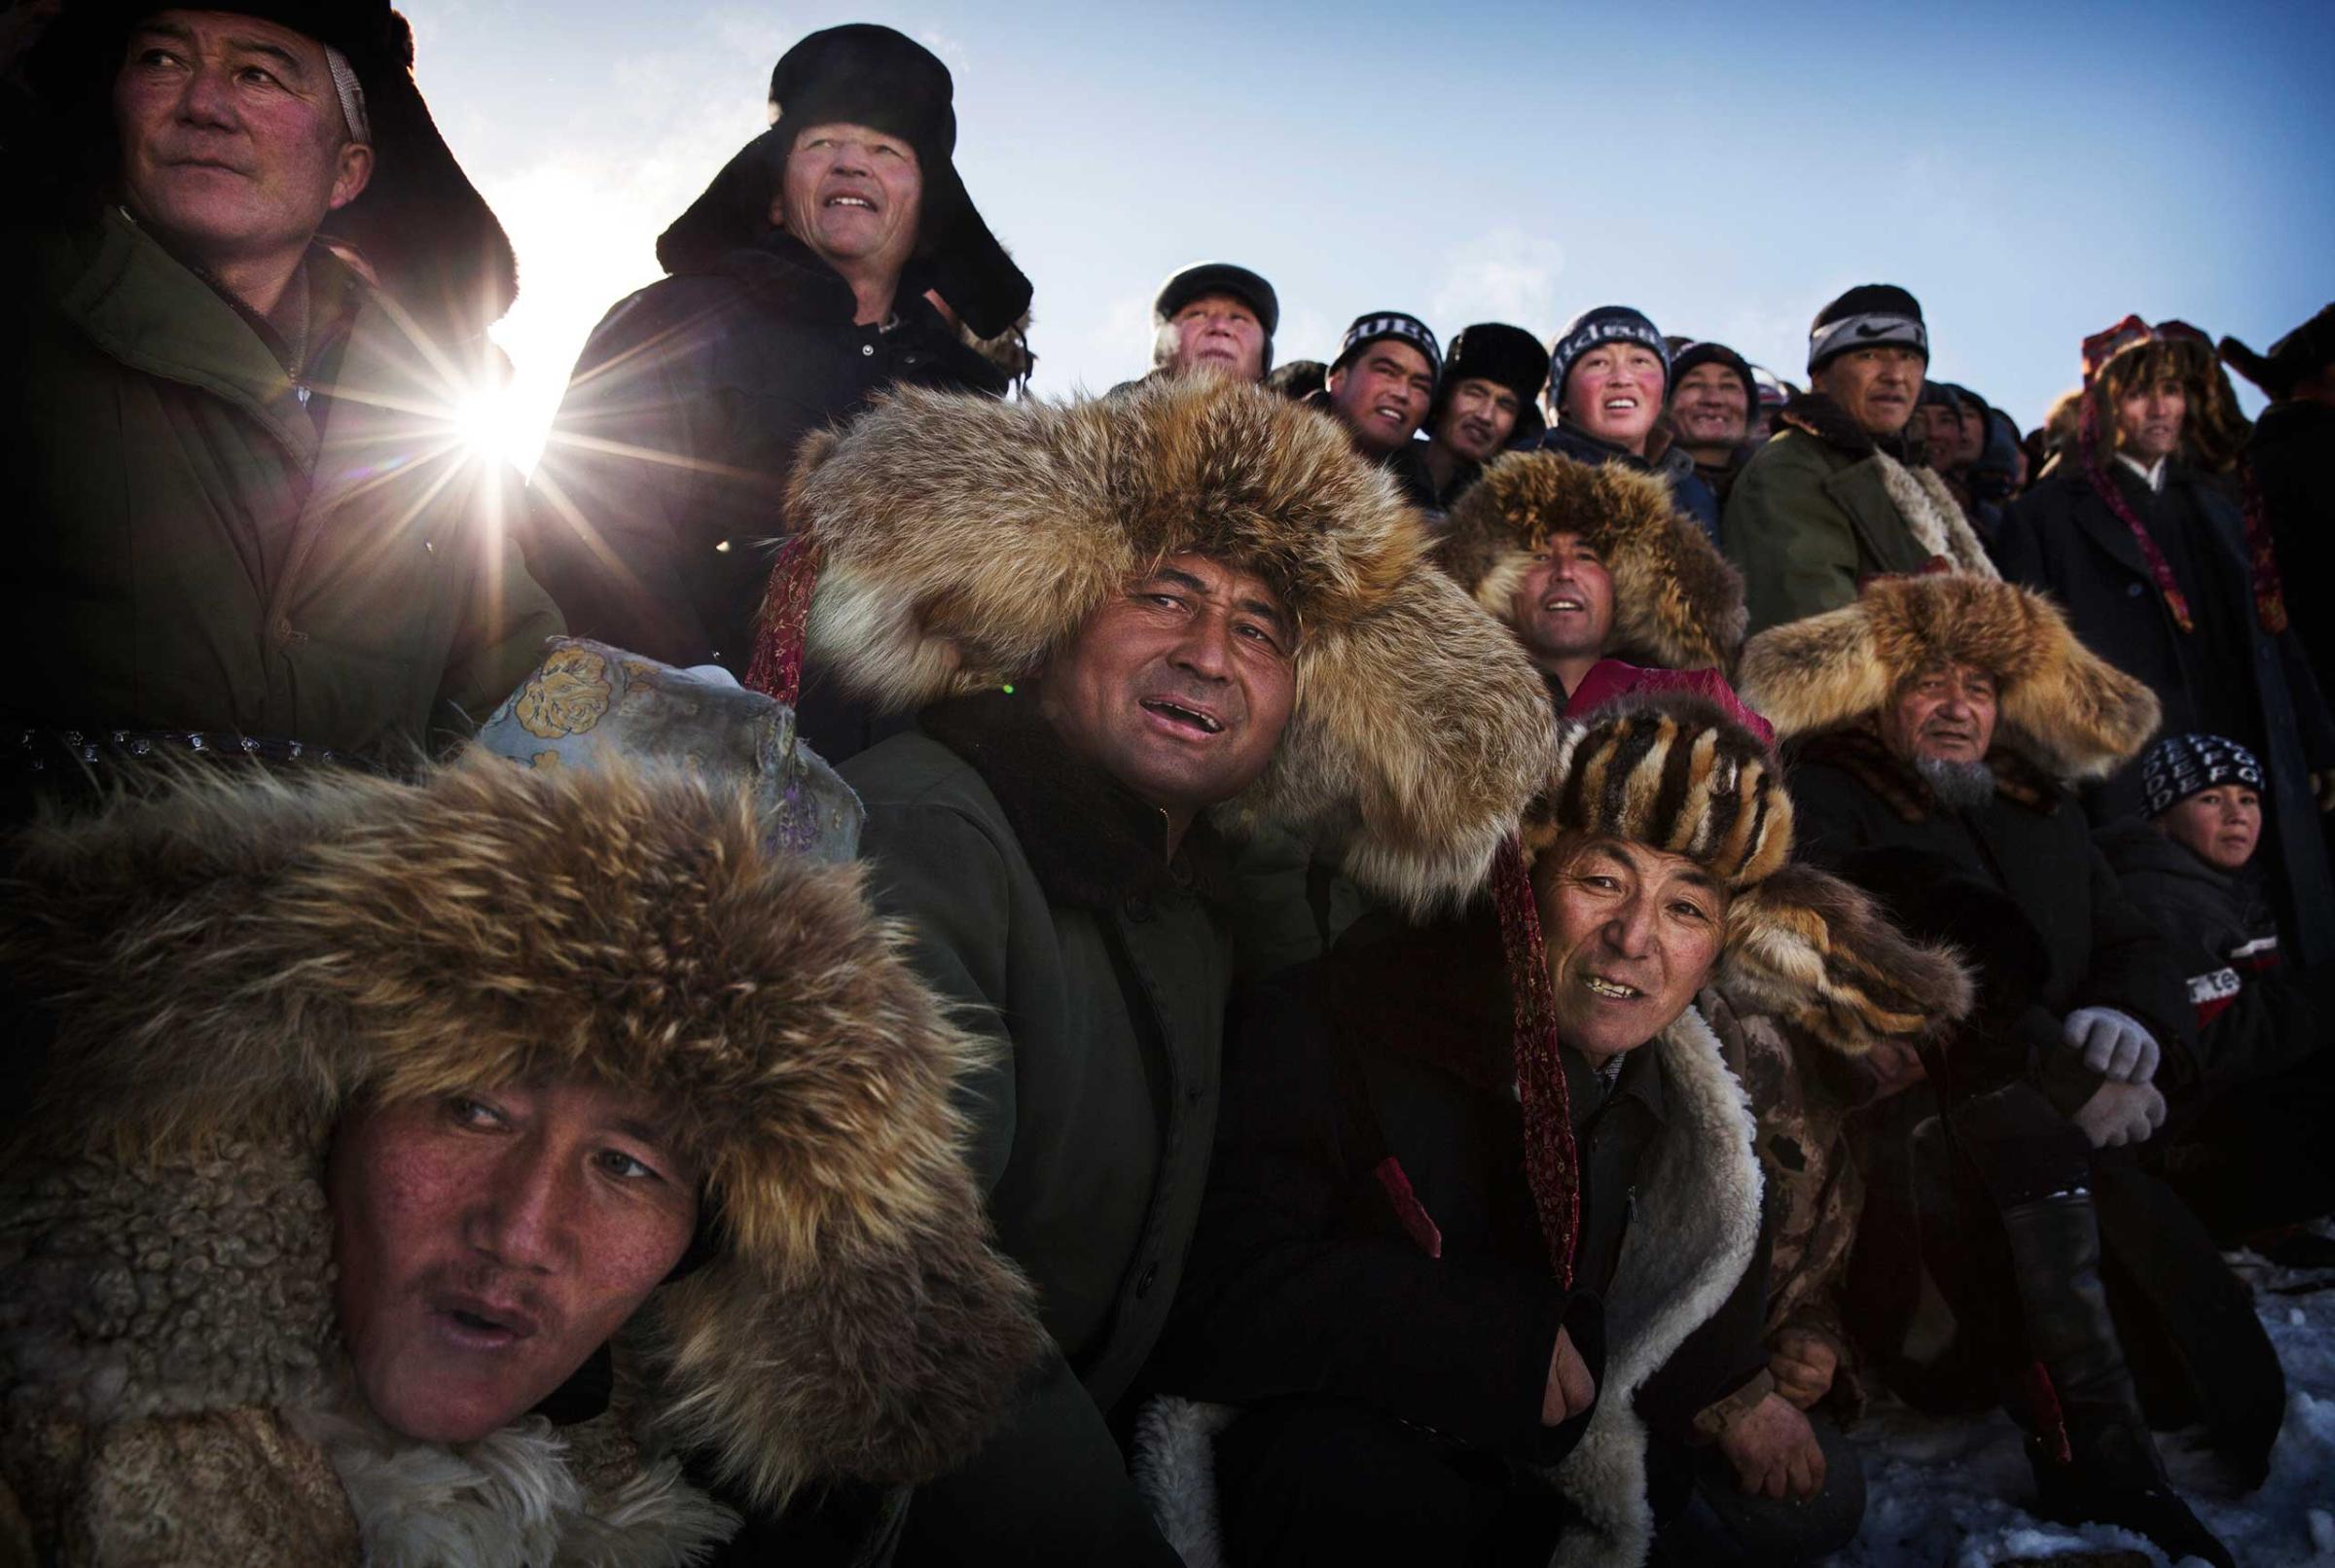 Spectators react as they watch a Chinese Kazakh eagle hunter, not seen, release his bird during a local competition in the mountains of Qinghe County, Xinjiang, northwestern China., Jan. 30, 2015.